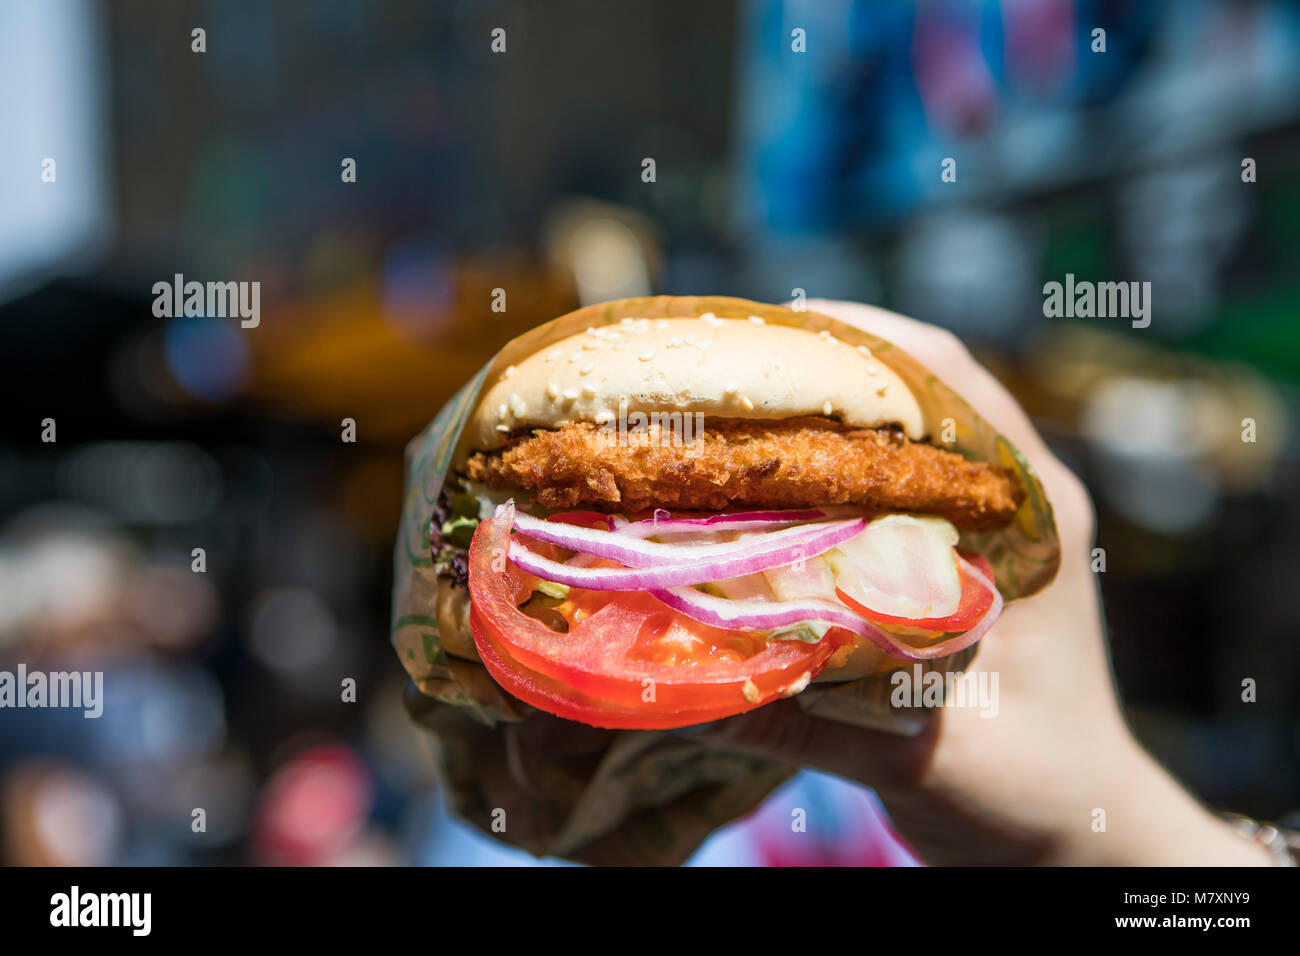 Vegan deep fried Seitan burger with tomatoes and onions Stock Photo